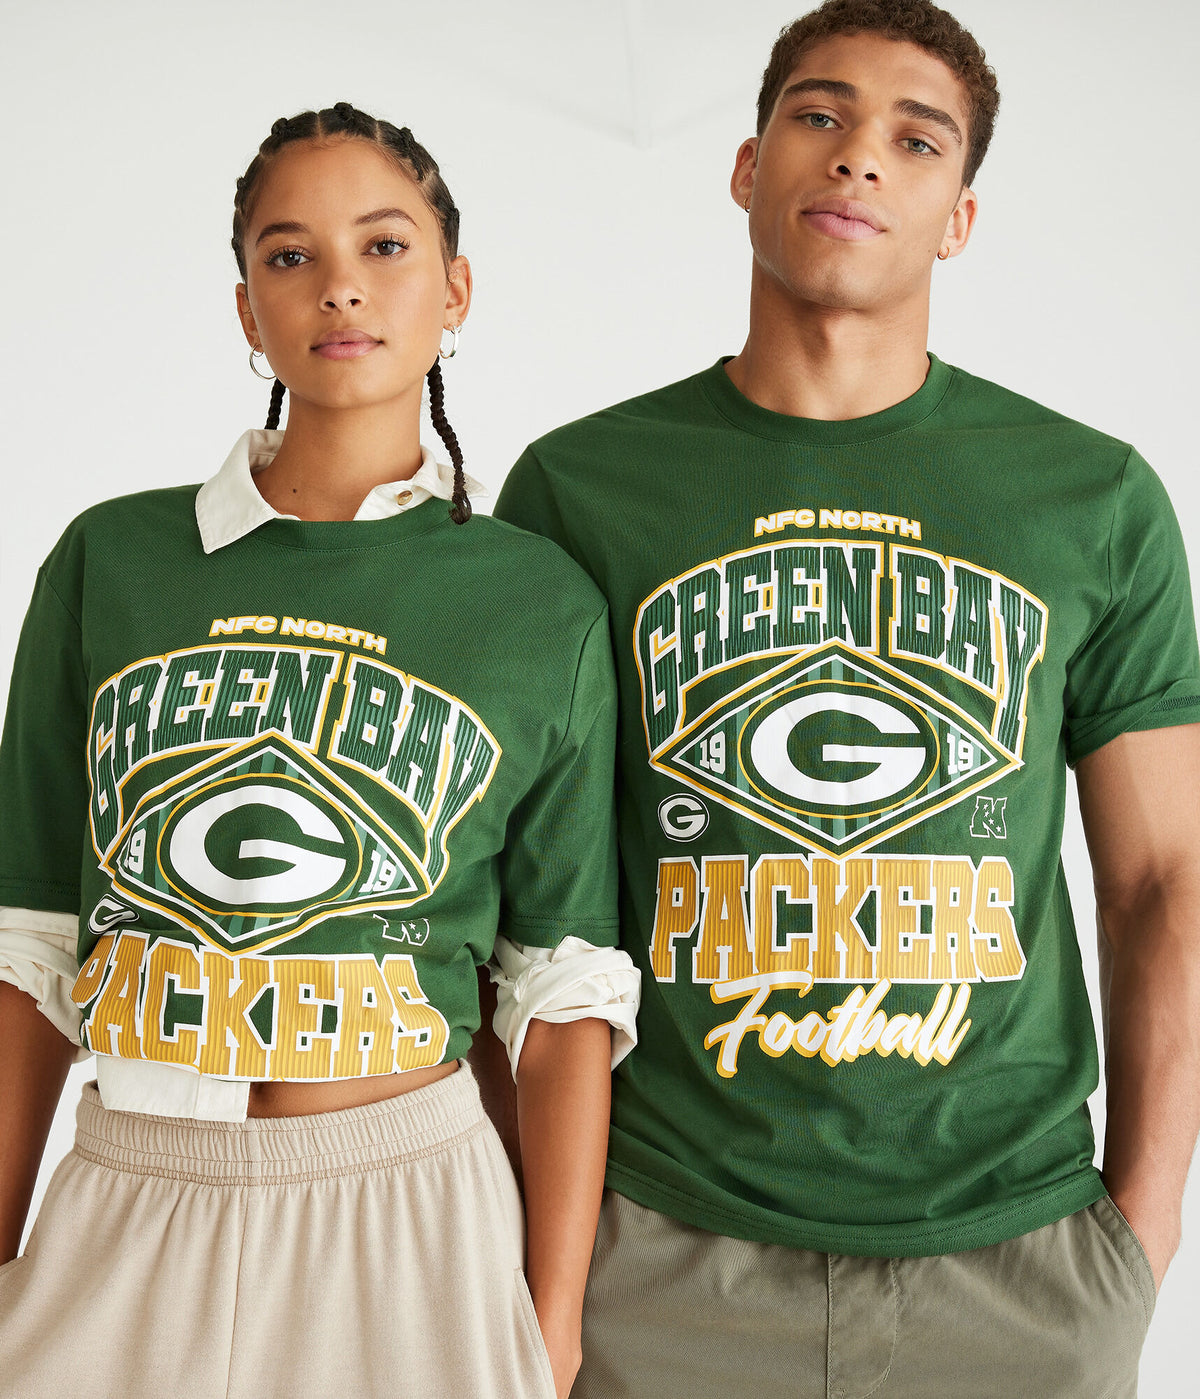 Aeropostale Mens'  Bay Packers Graphic Tee - Green - Size XS - Cotton - Teen Fashion & Clothing Green